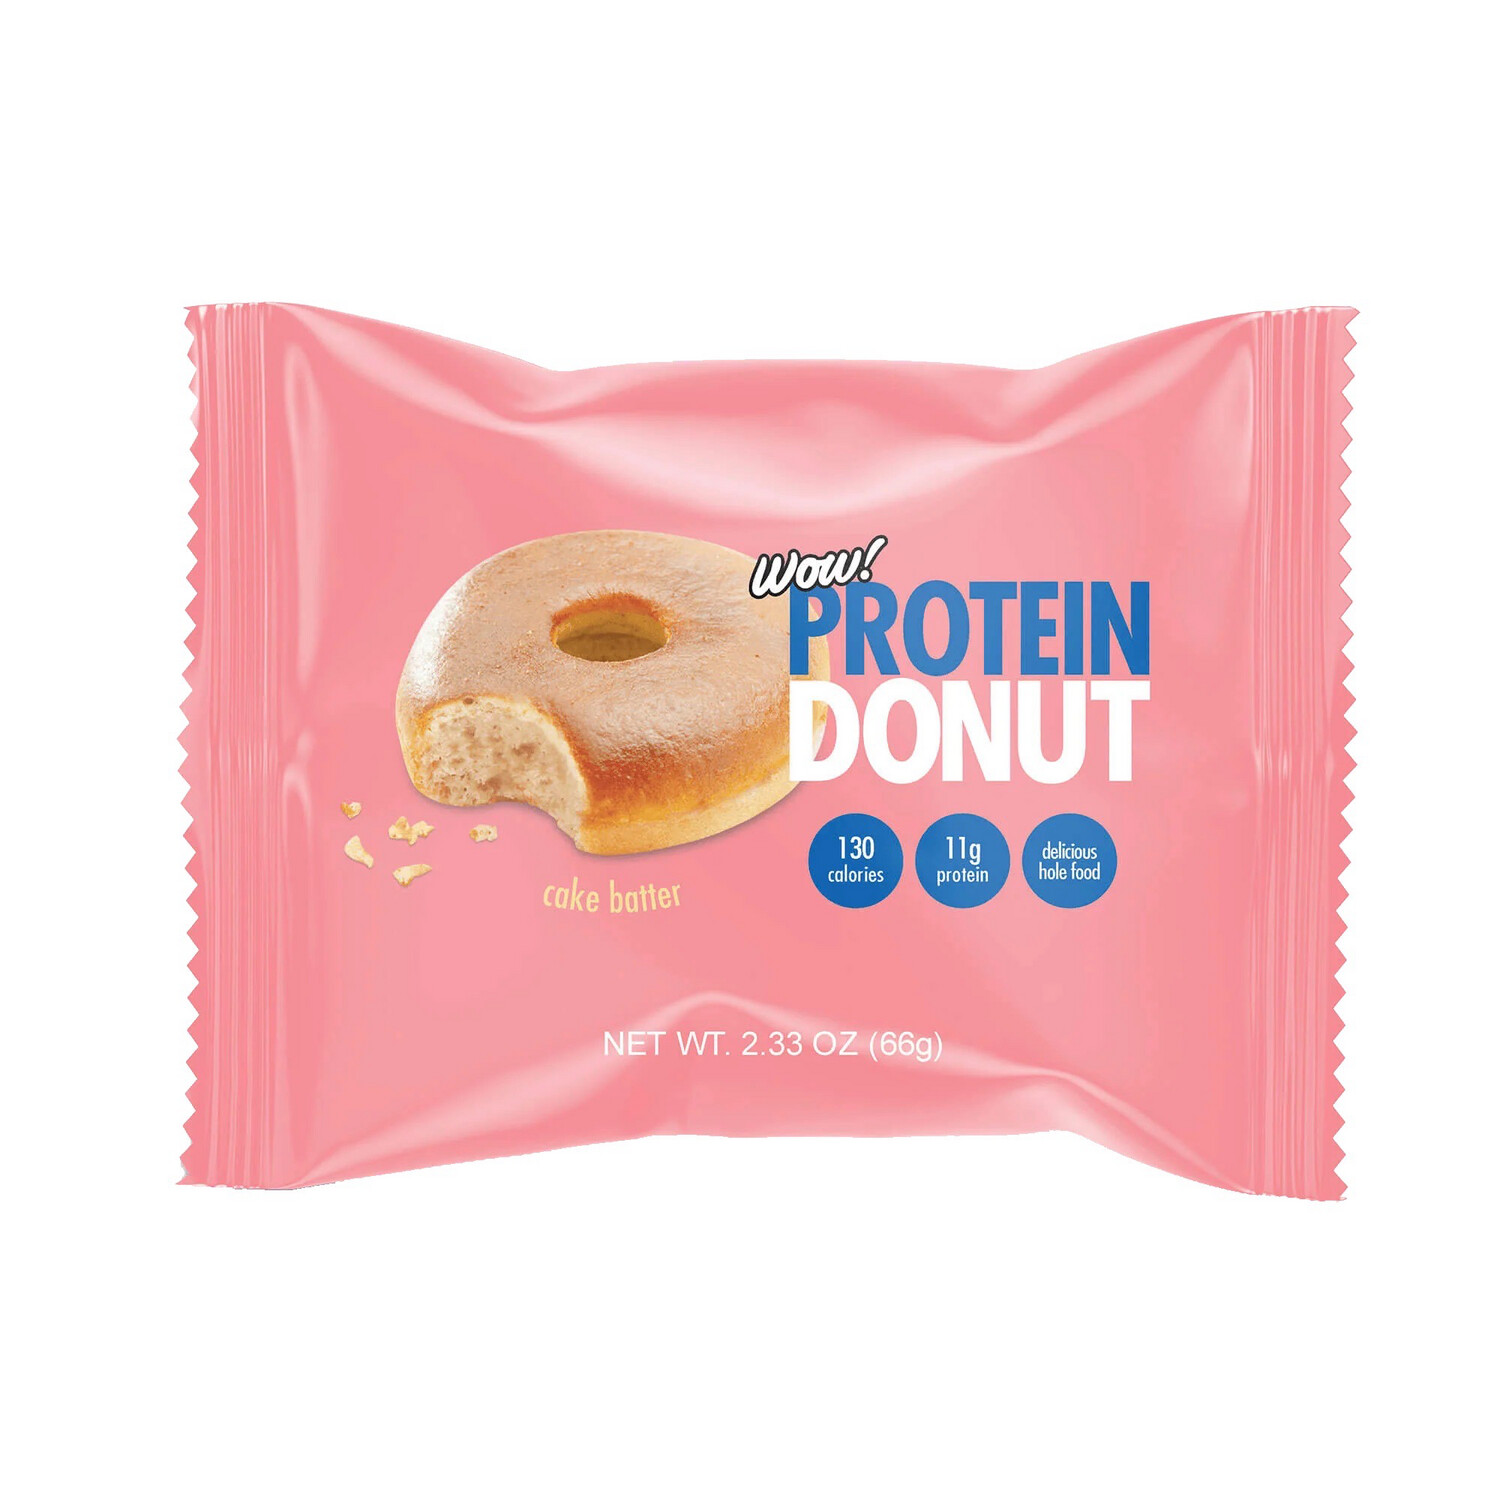 Wow! Protein Donut Cake Batter 11g Pro 